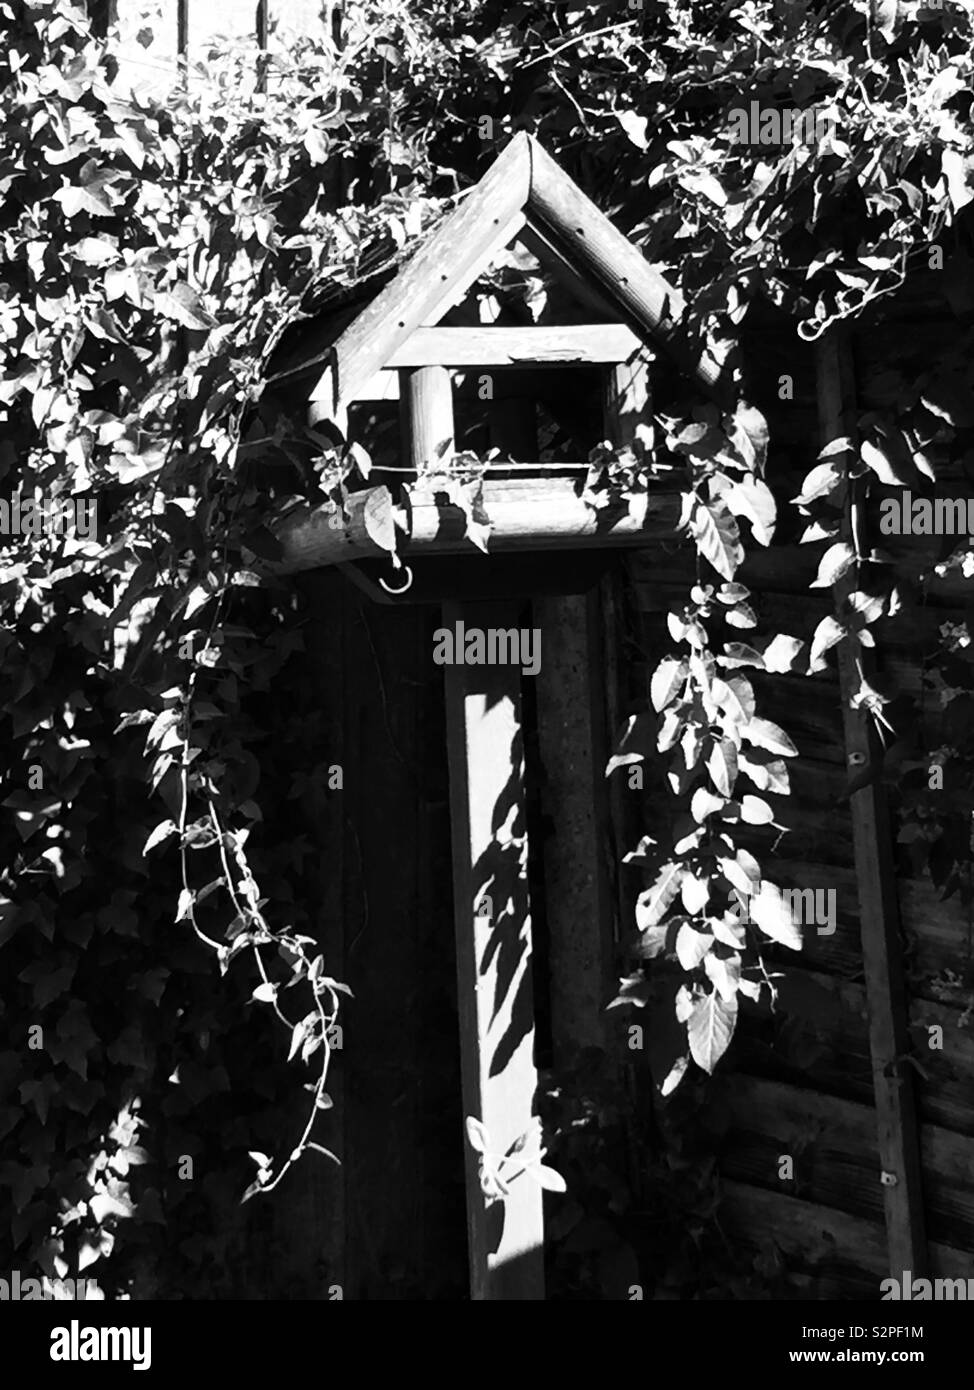 Black and white old bird house overgrown with vegetation Stock Photo